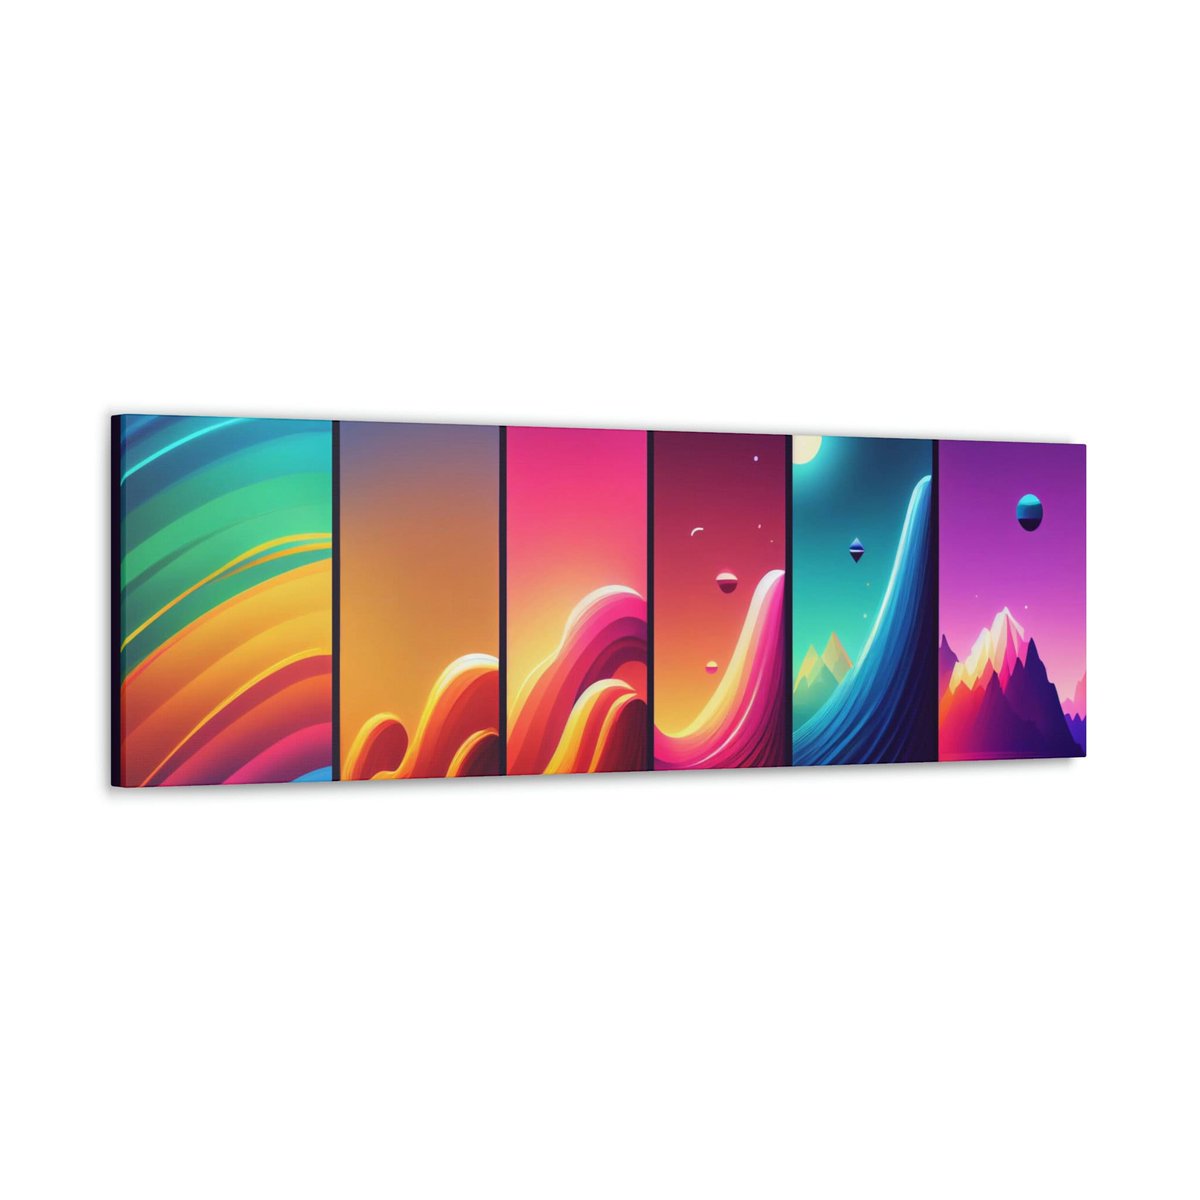 Excited to share the latest addition to my #etsy shop: Colorful & Geometric Rainbow Wave Canvas Print // Check it out here: etsy.me/42ZqEwW

#canvas #wallart #gallerywrap #horizontal #colorful #mountains #seascape #abstract